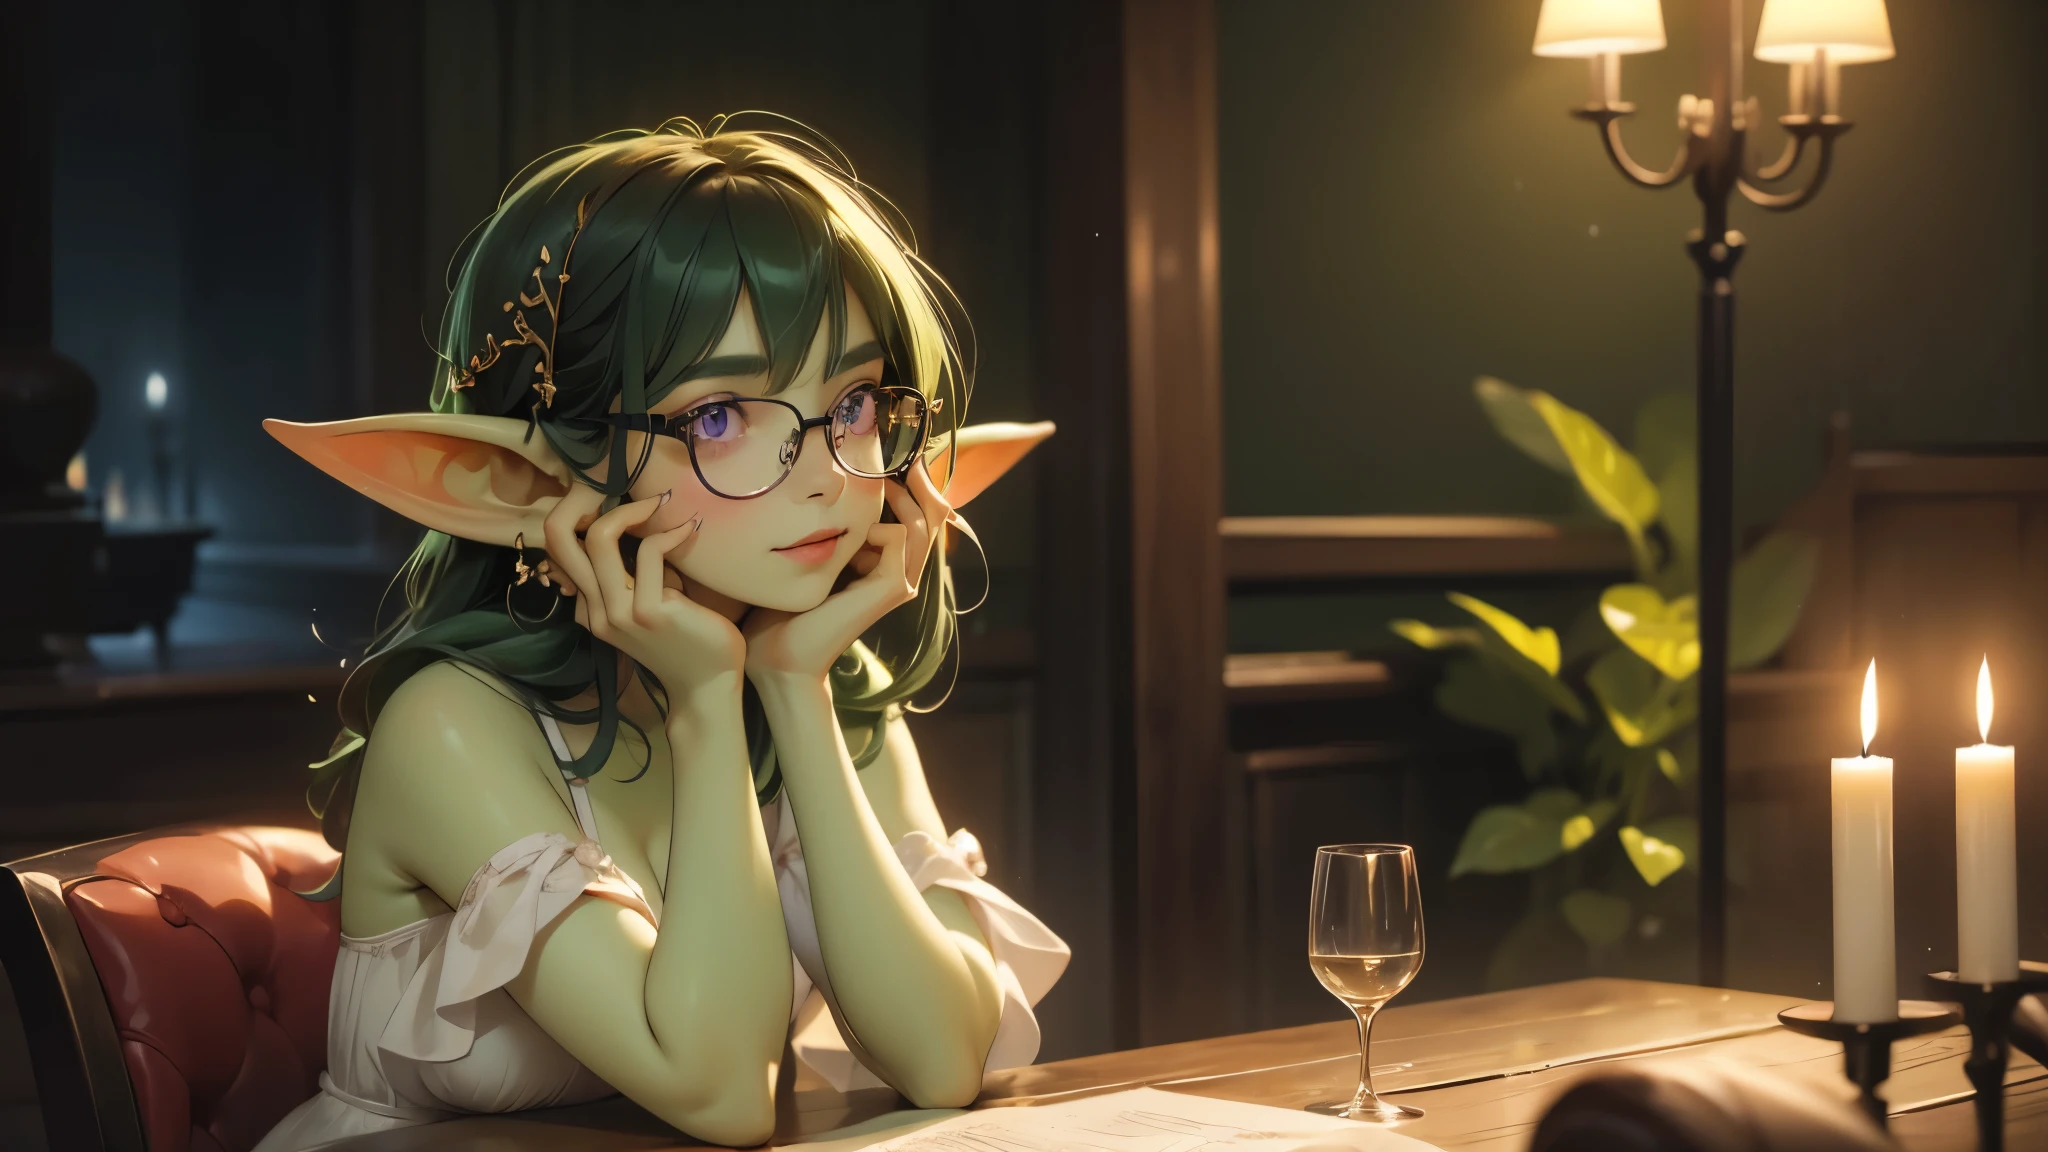 ((best quality)), ((masterpiece)), (very detailed), 4k, perfect face, very small goblin girl, green skin, purple eyes, small breasts, black rimmed glasses, short dark green hair, sitting in plush red velvet chair, single small candle on a table provides only light, black background, romantic, dimly lit, ethereal, beautiful, wearing expensive white dress and pearl earrings, date night, slight smile, holding glass of white wine, looking at viewer